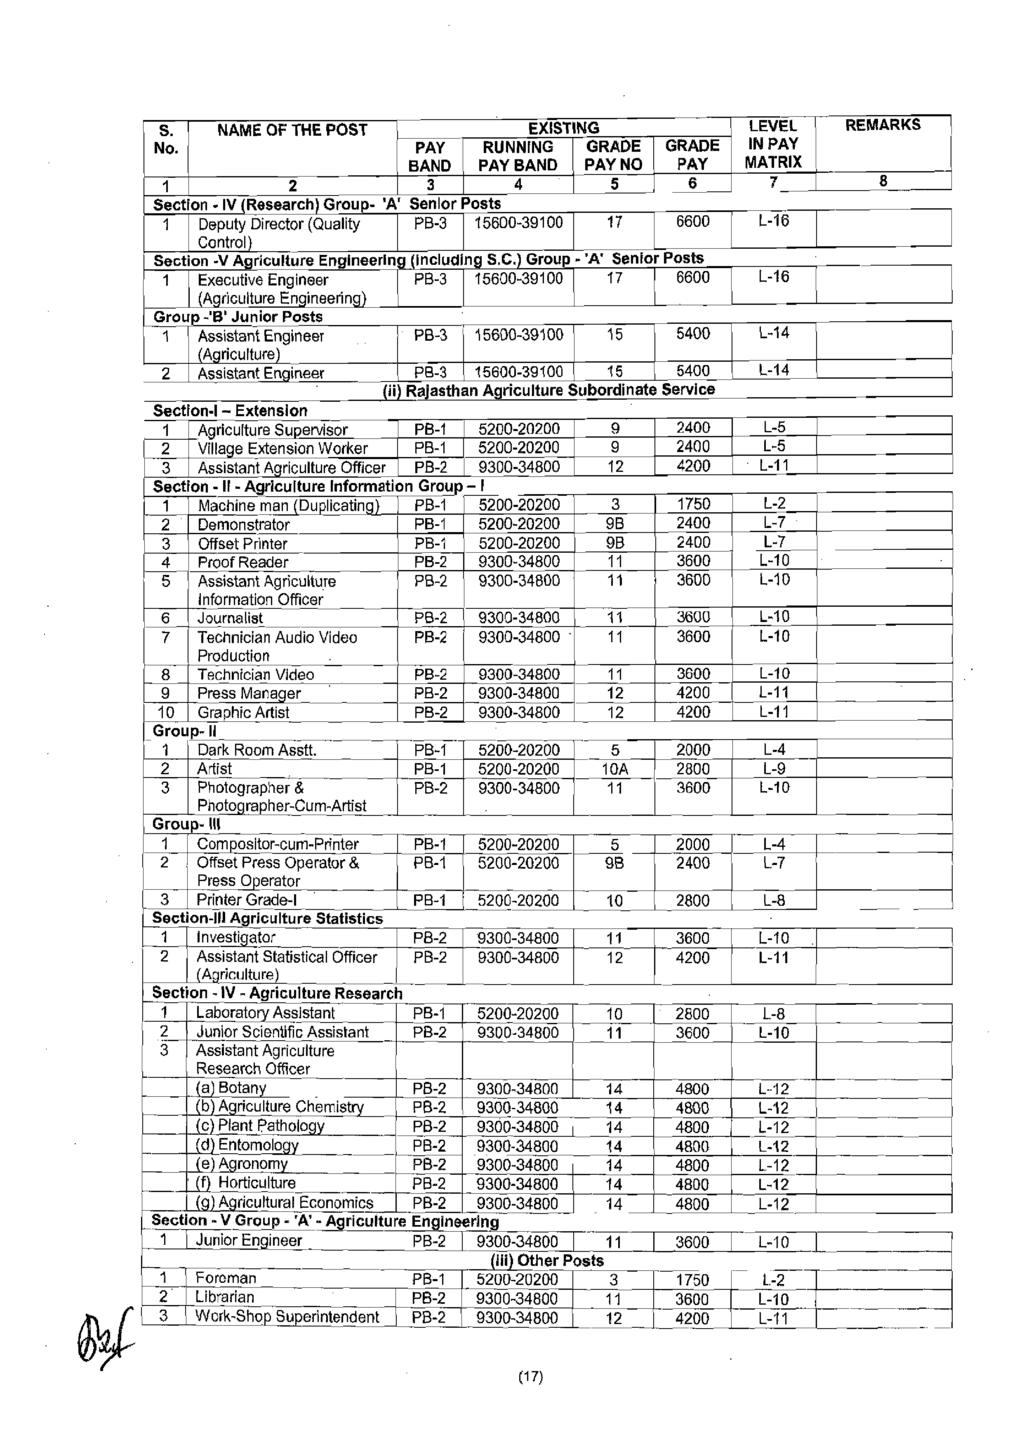 s. NAME OF THE POST EXISTING LEVEL REMARKS PAY RUNNING GRADE GRADE IN PAY Section - IV (Research) Group- 'A' Senior Posts 1 Deputy Director (Quality PB-3 15600-39100 17 6600 L-16 Control) Section -V